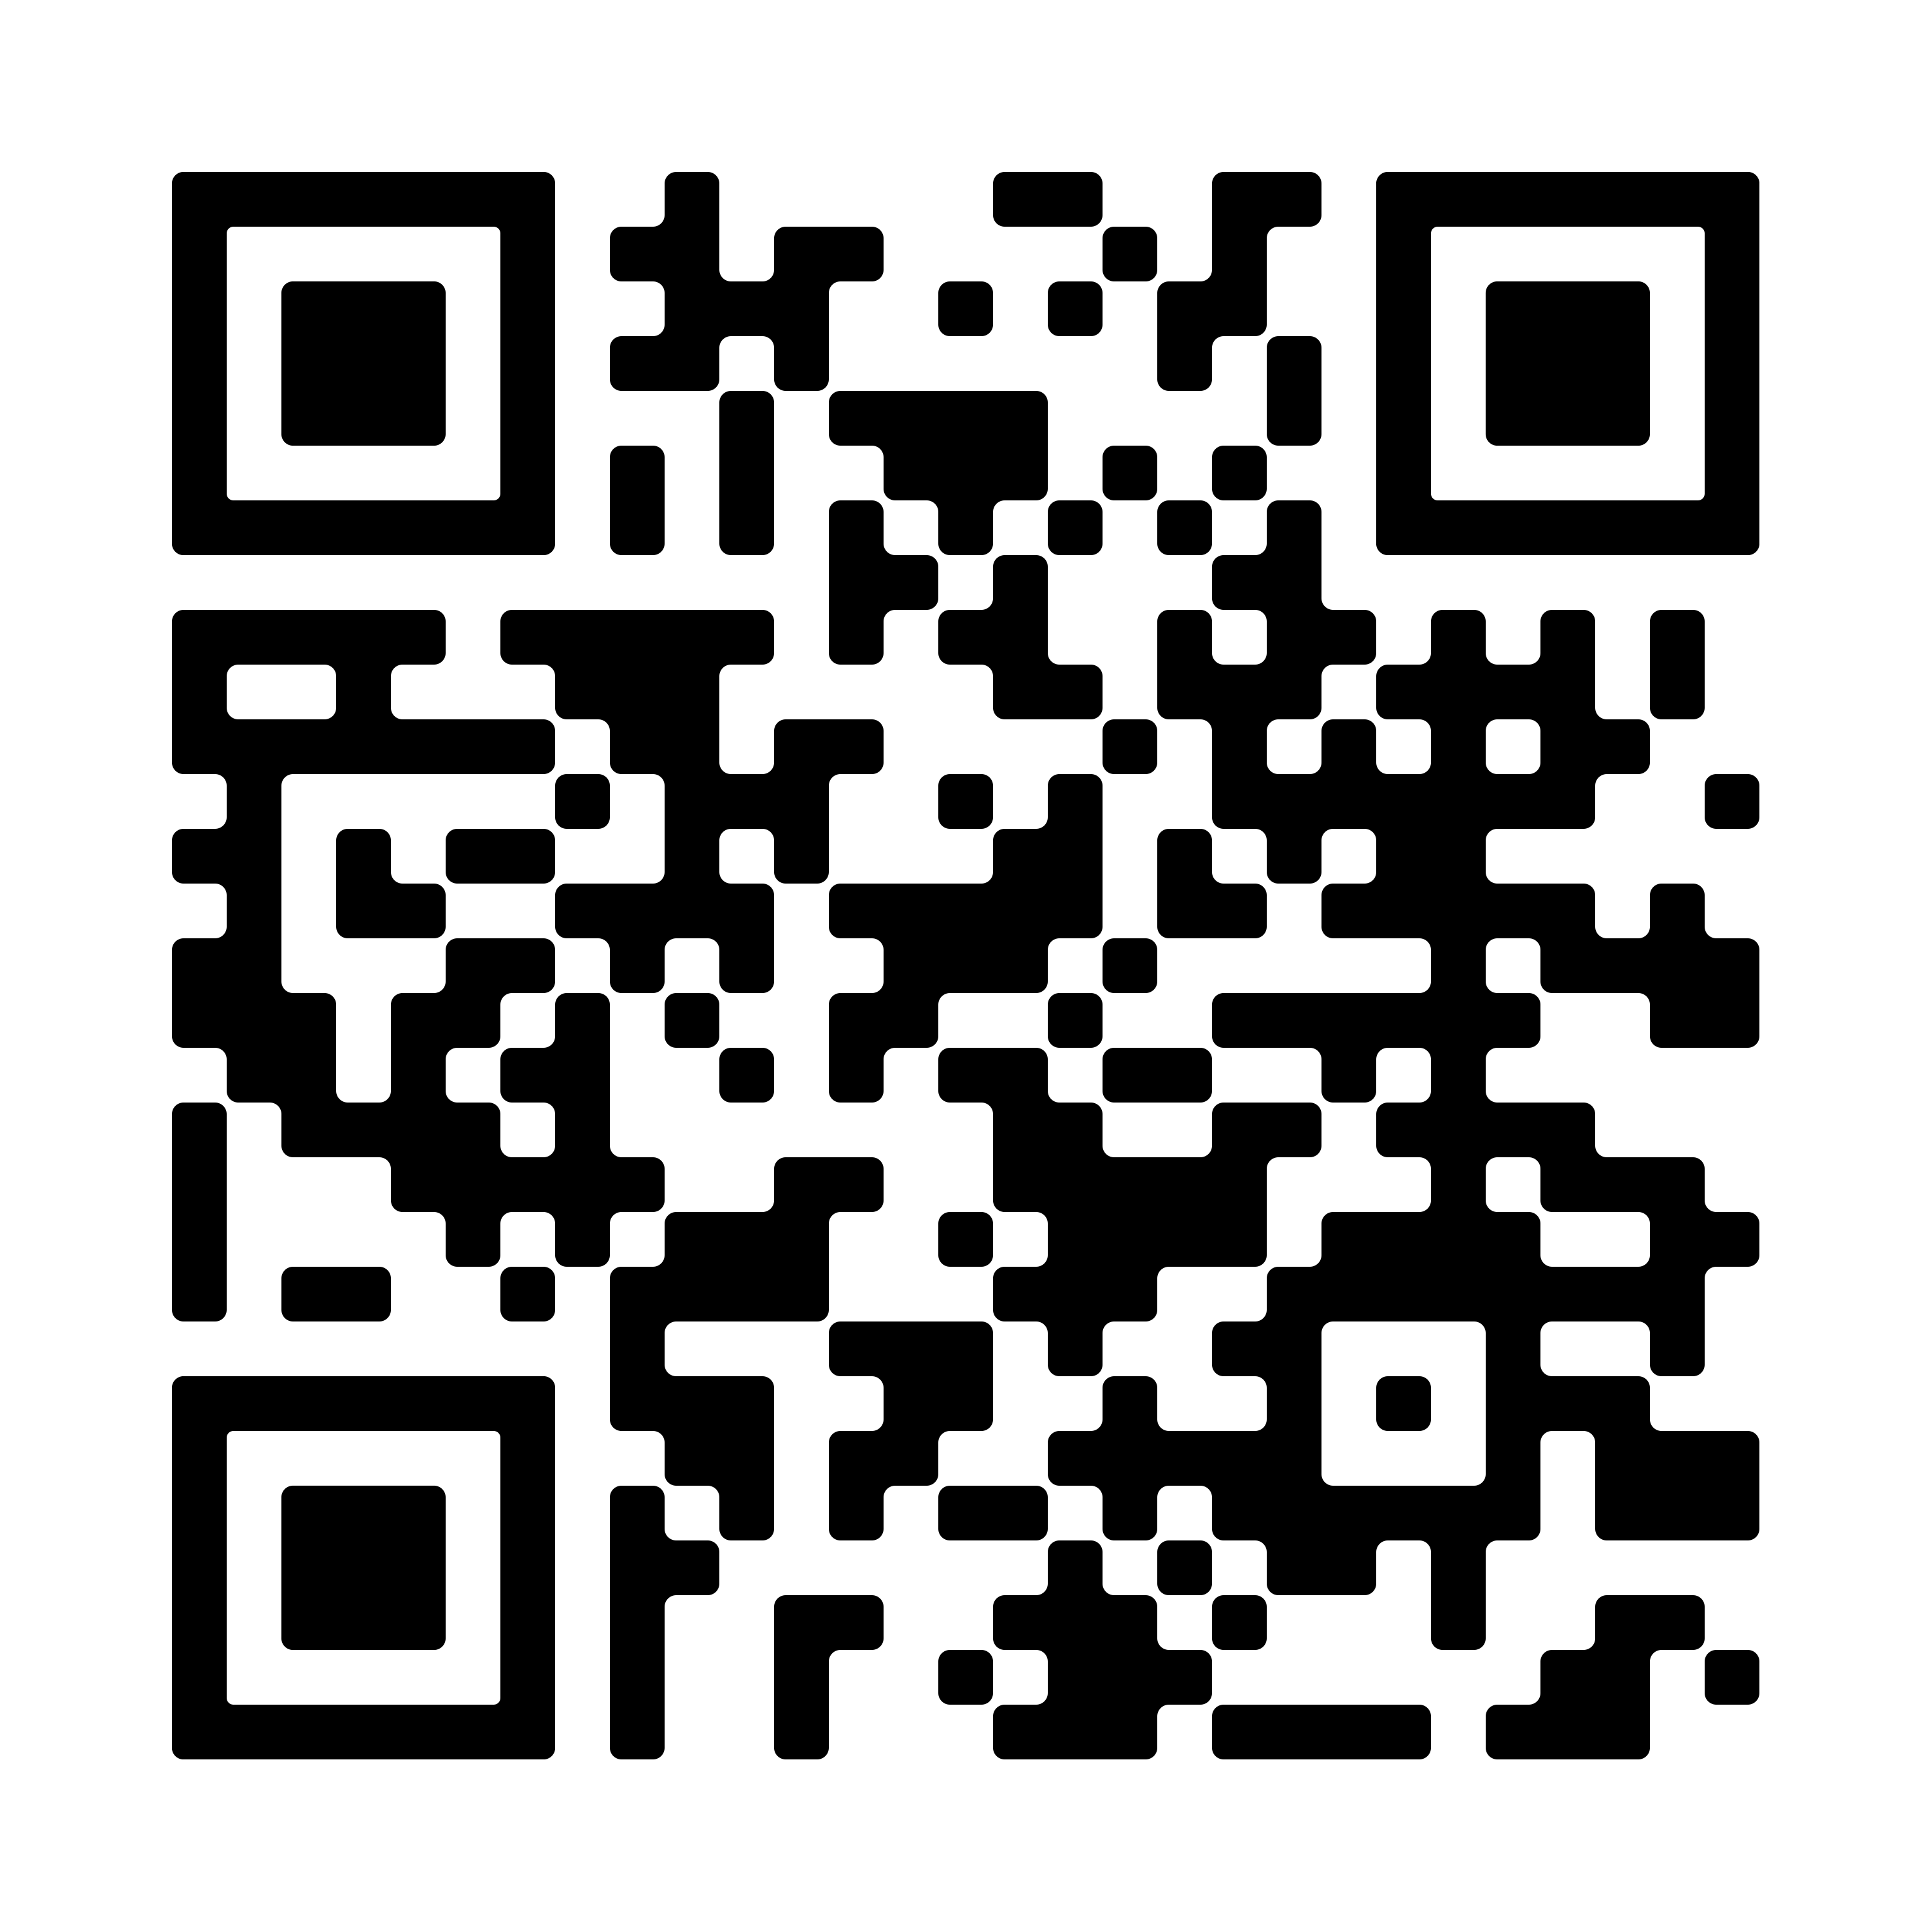 Scan the QR-Code to open Calm Mini in partnership with Novotel